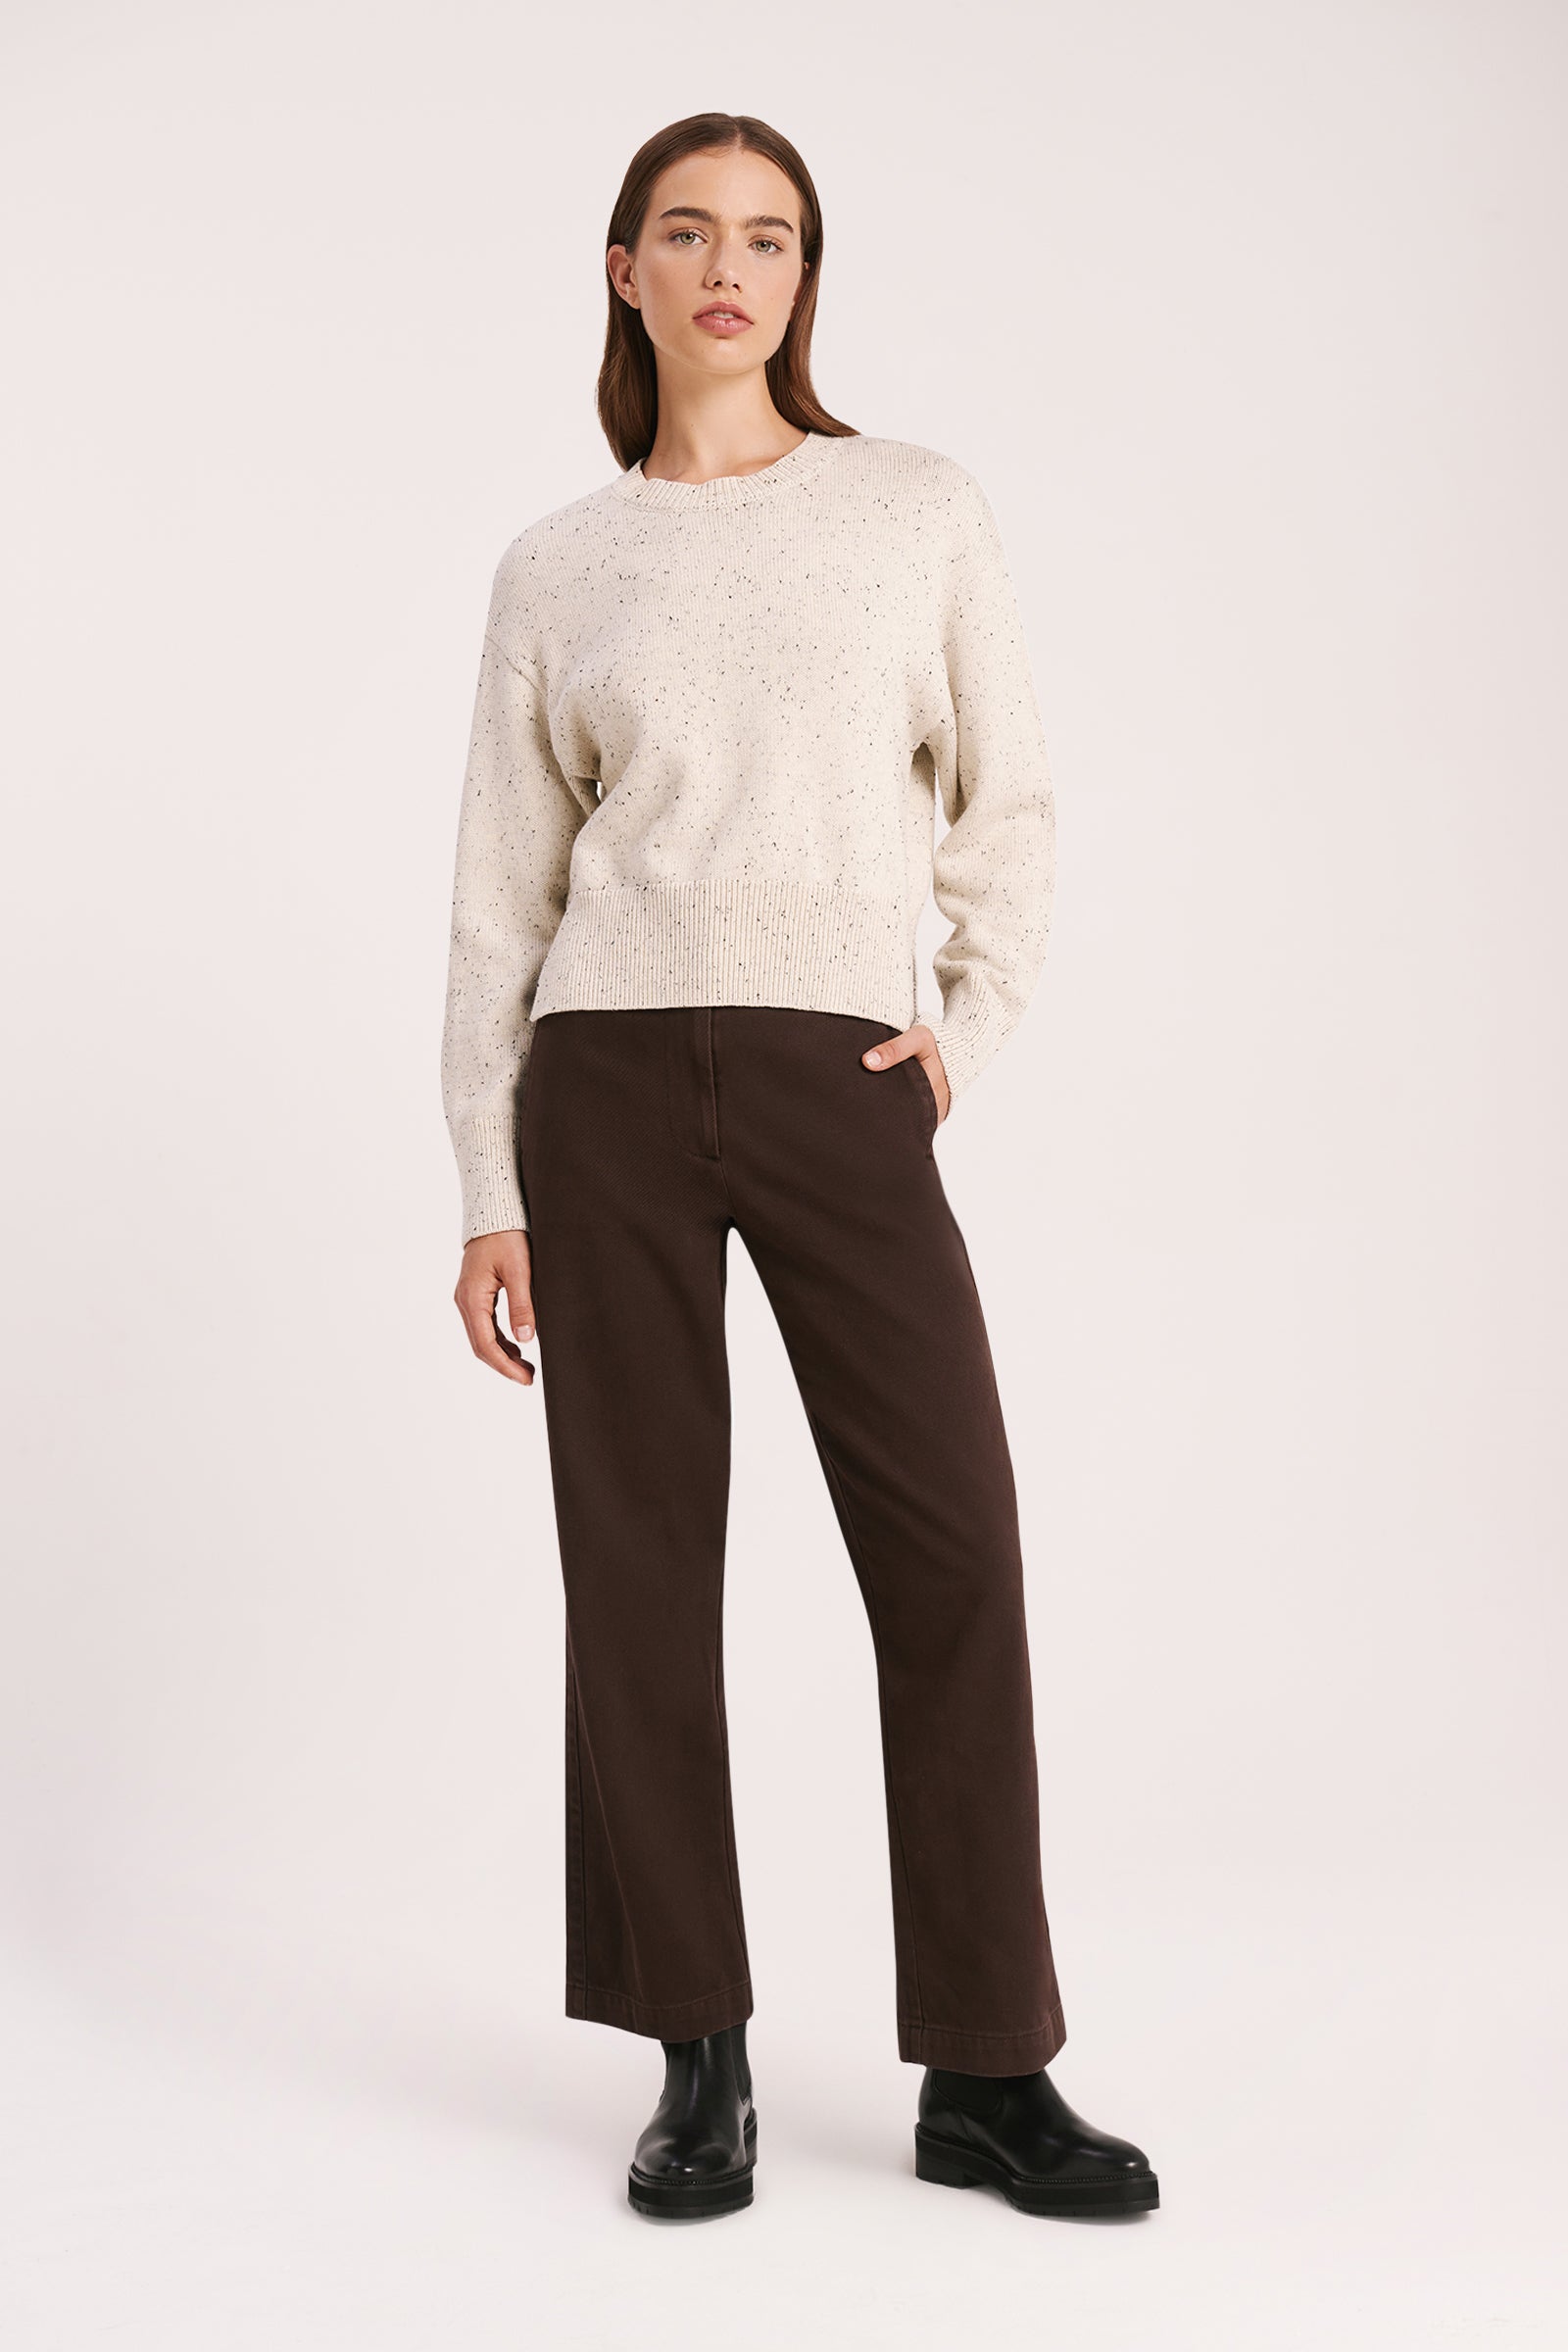 Nude Lucy Umi Speckle Knit in White Cloud